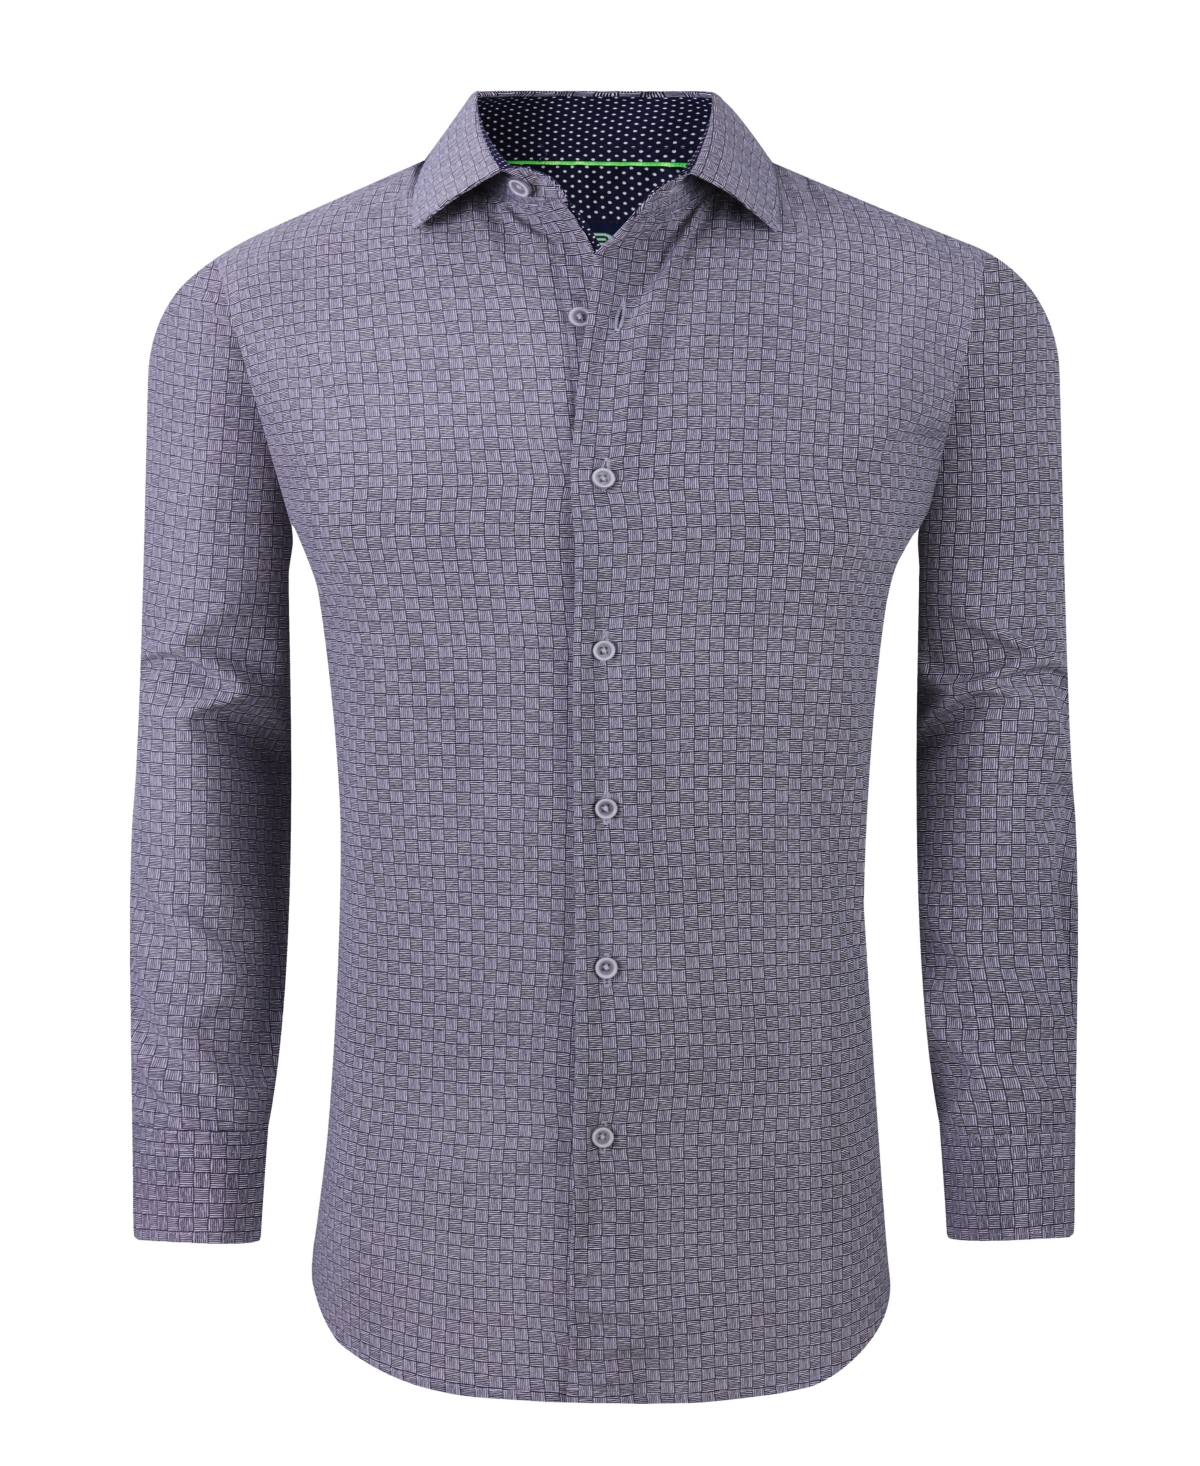 Tom Baine Men's Slim Fit Performance Long Sleeve Geometric Button Down Shirt In Navy Boxes